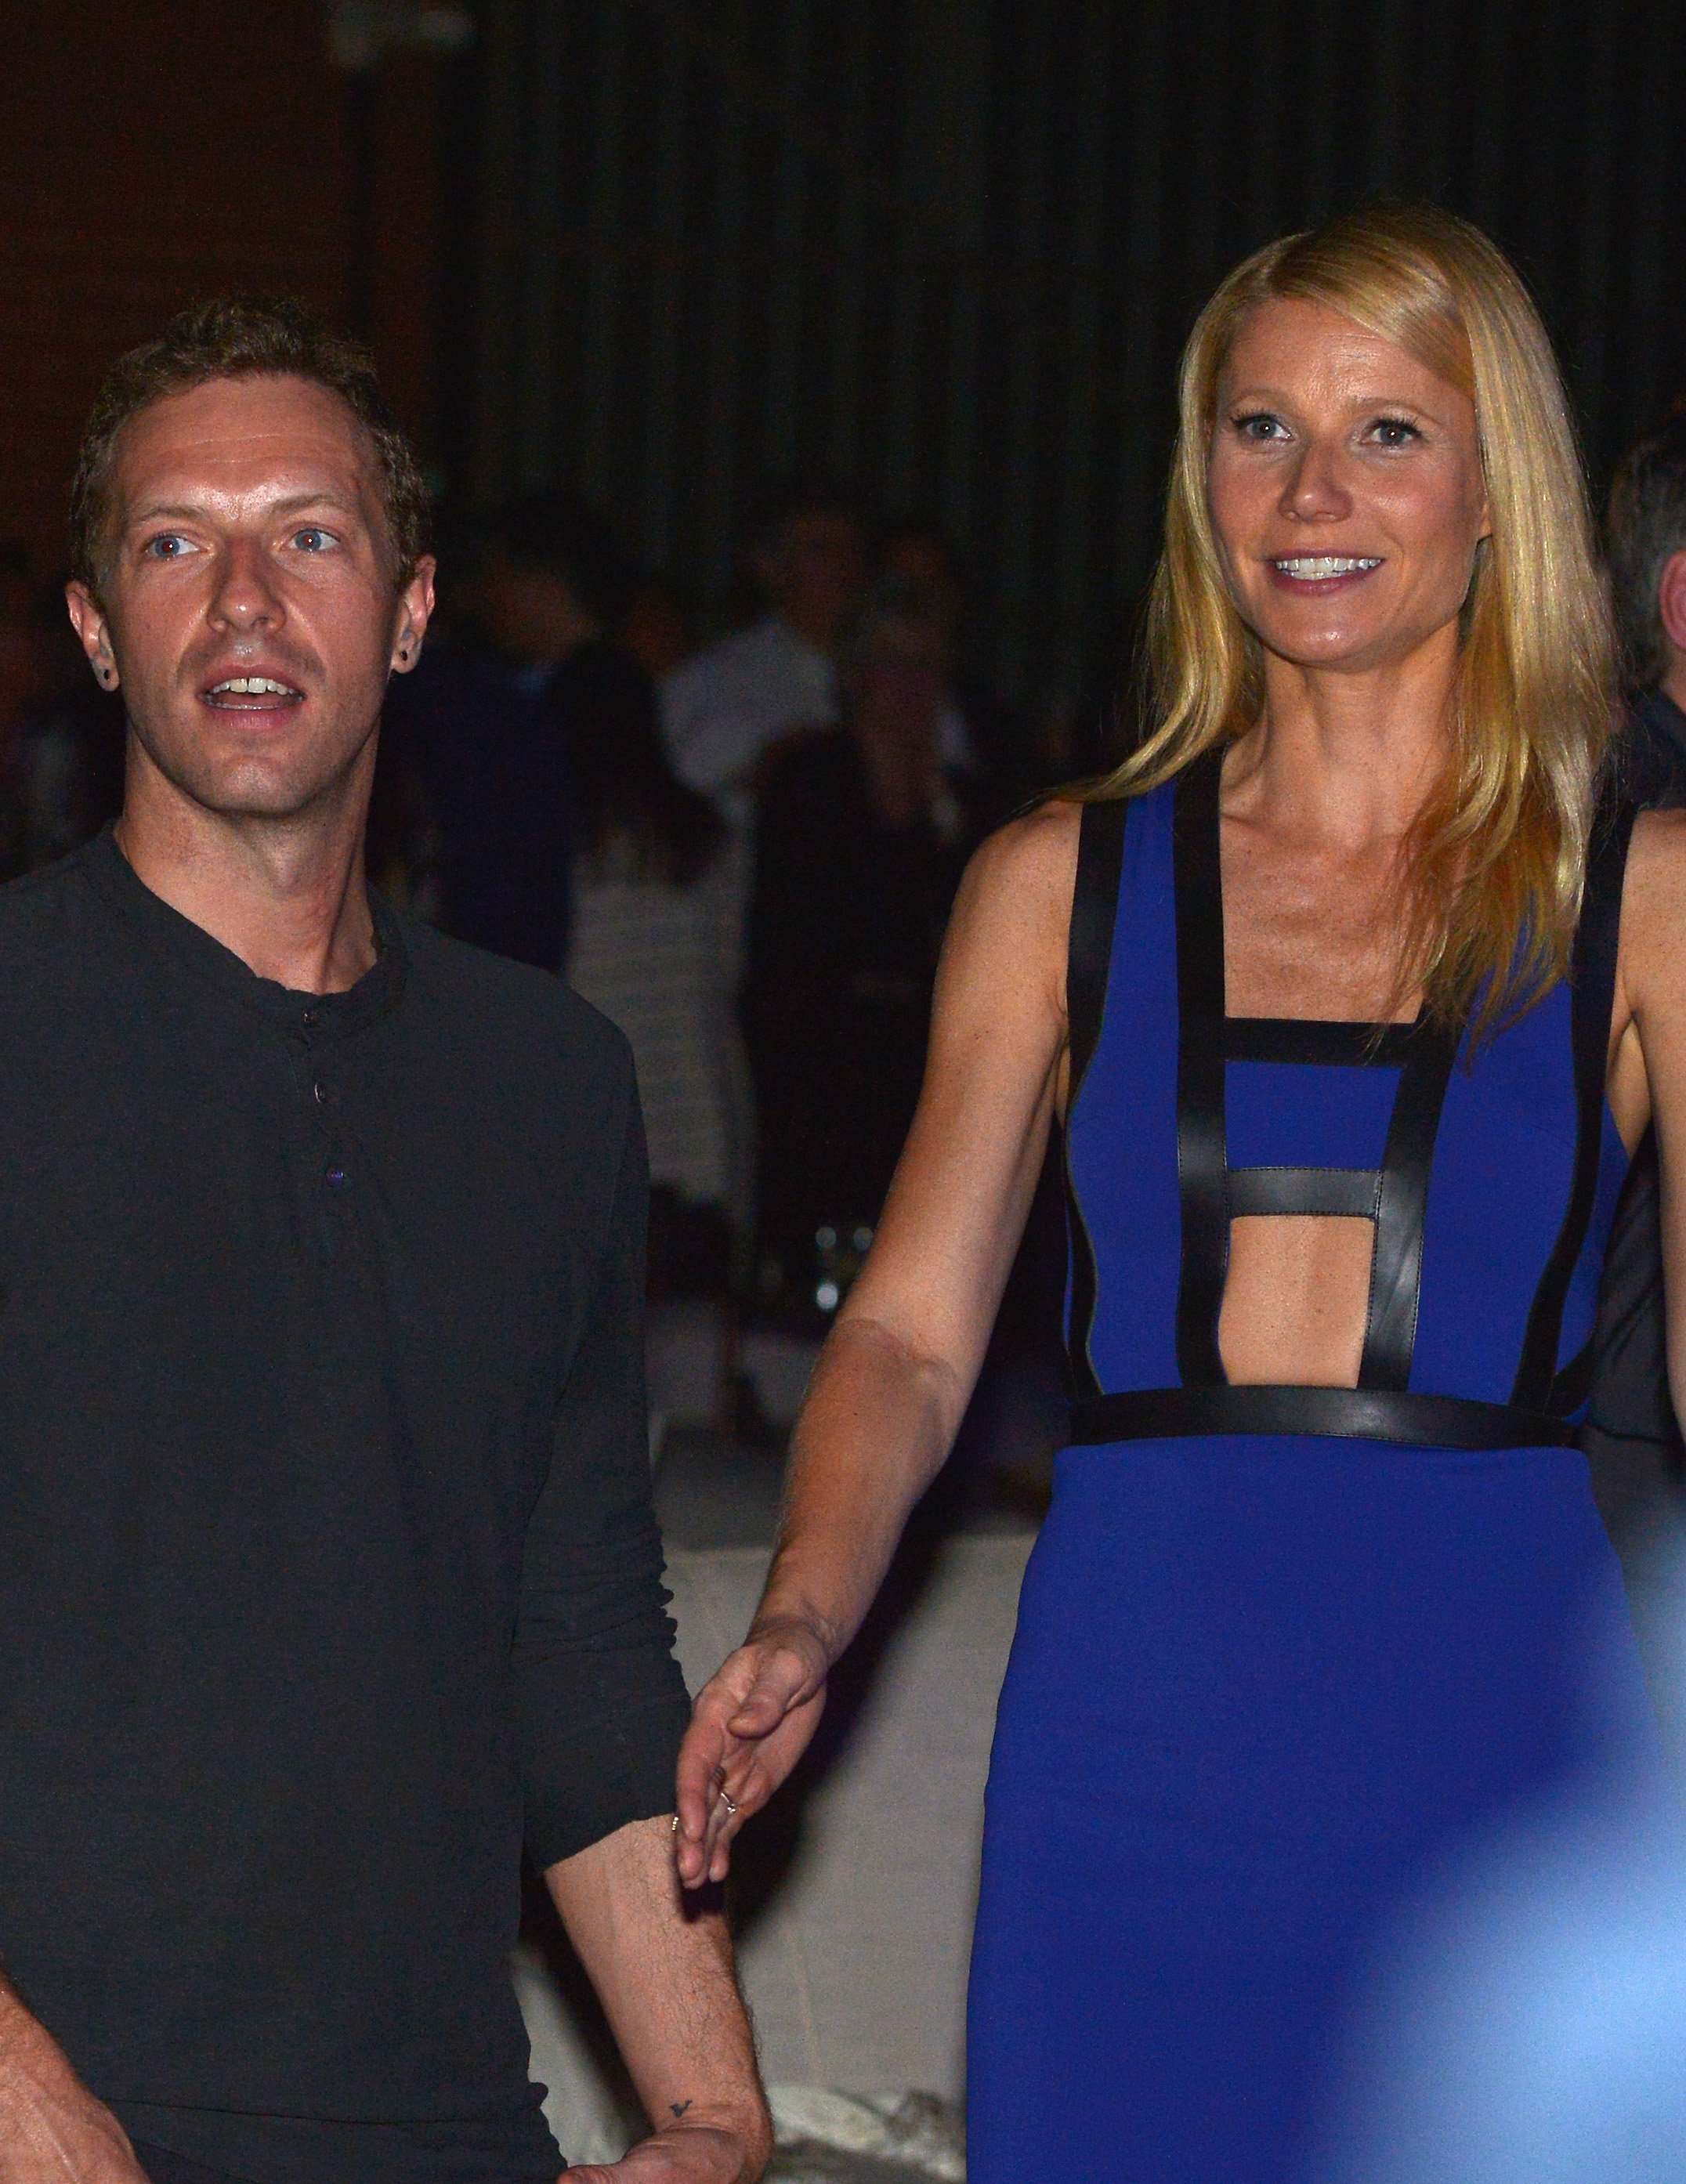 Chris Martin and Gwyneth Paltrow at the "Hollywood Stands Up To Cancer" event on January 28, 2014 | Source: Getty Images